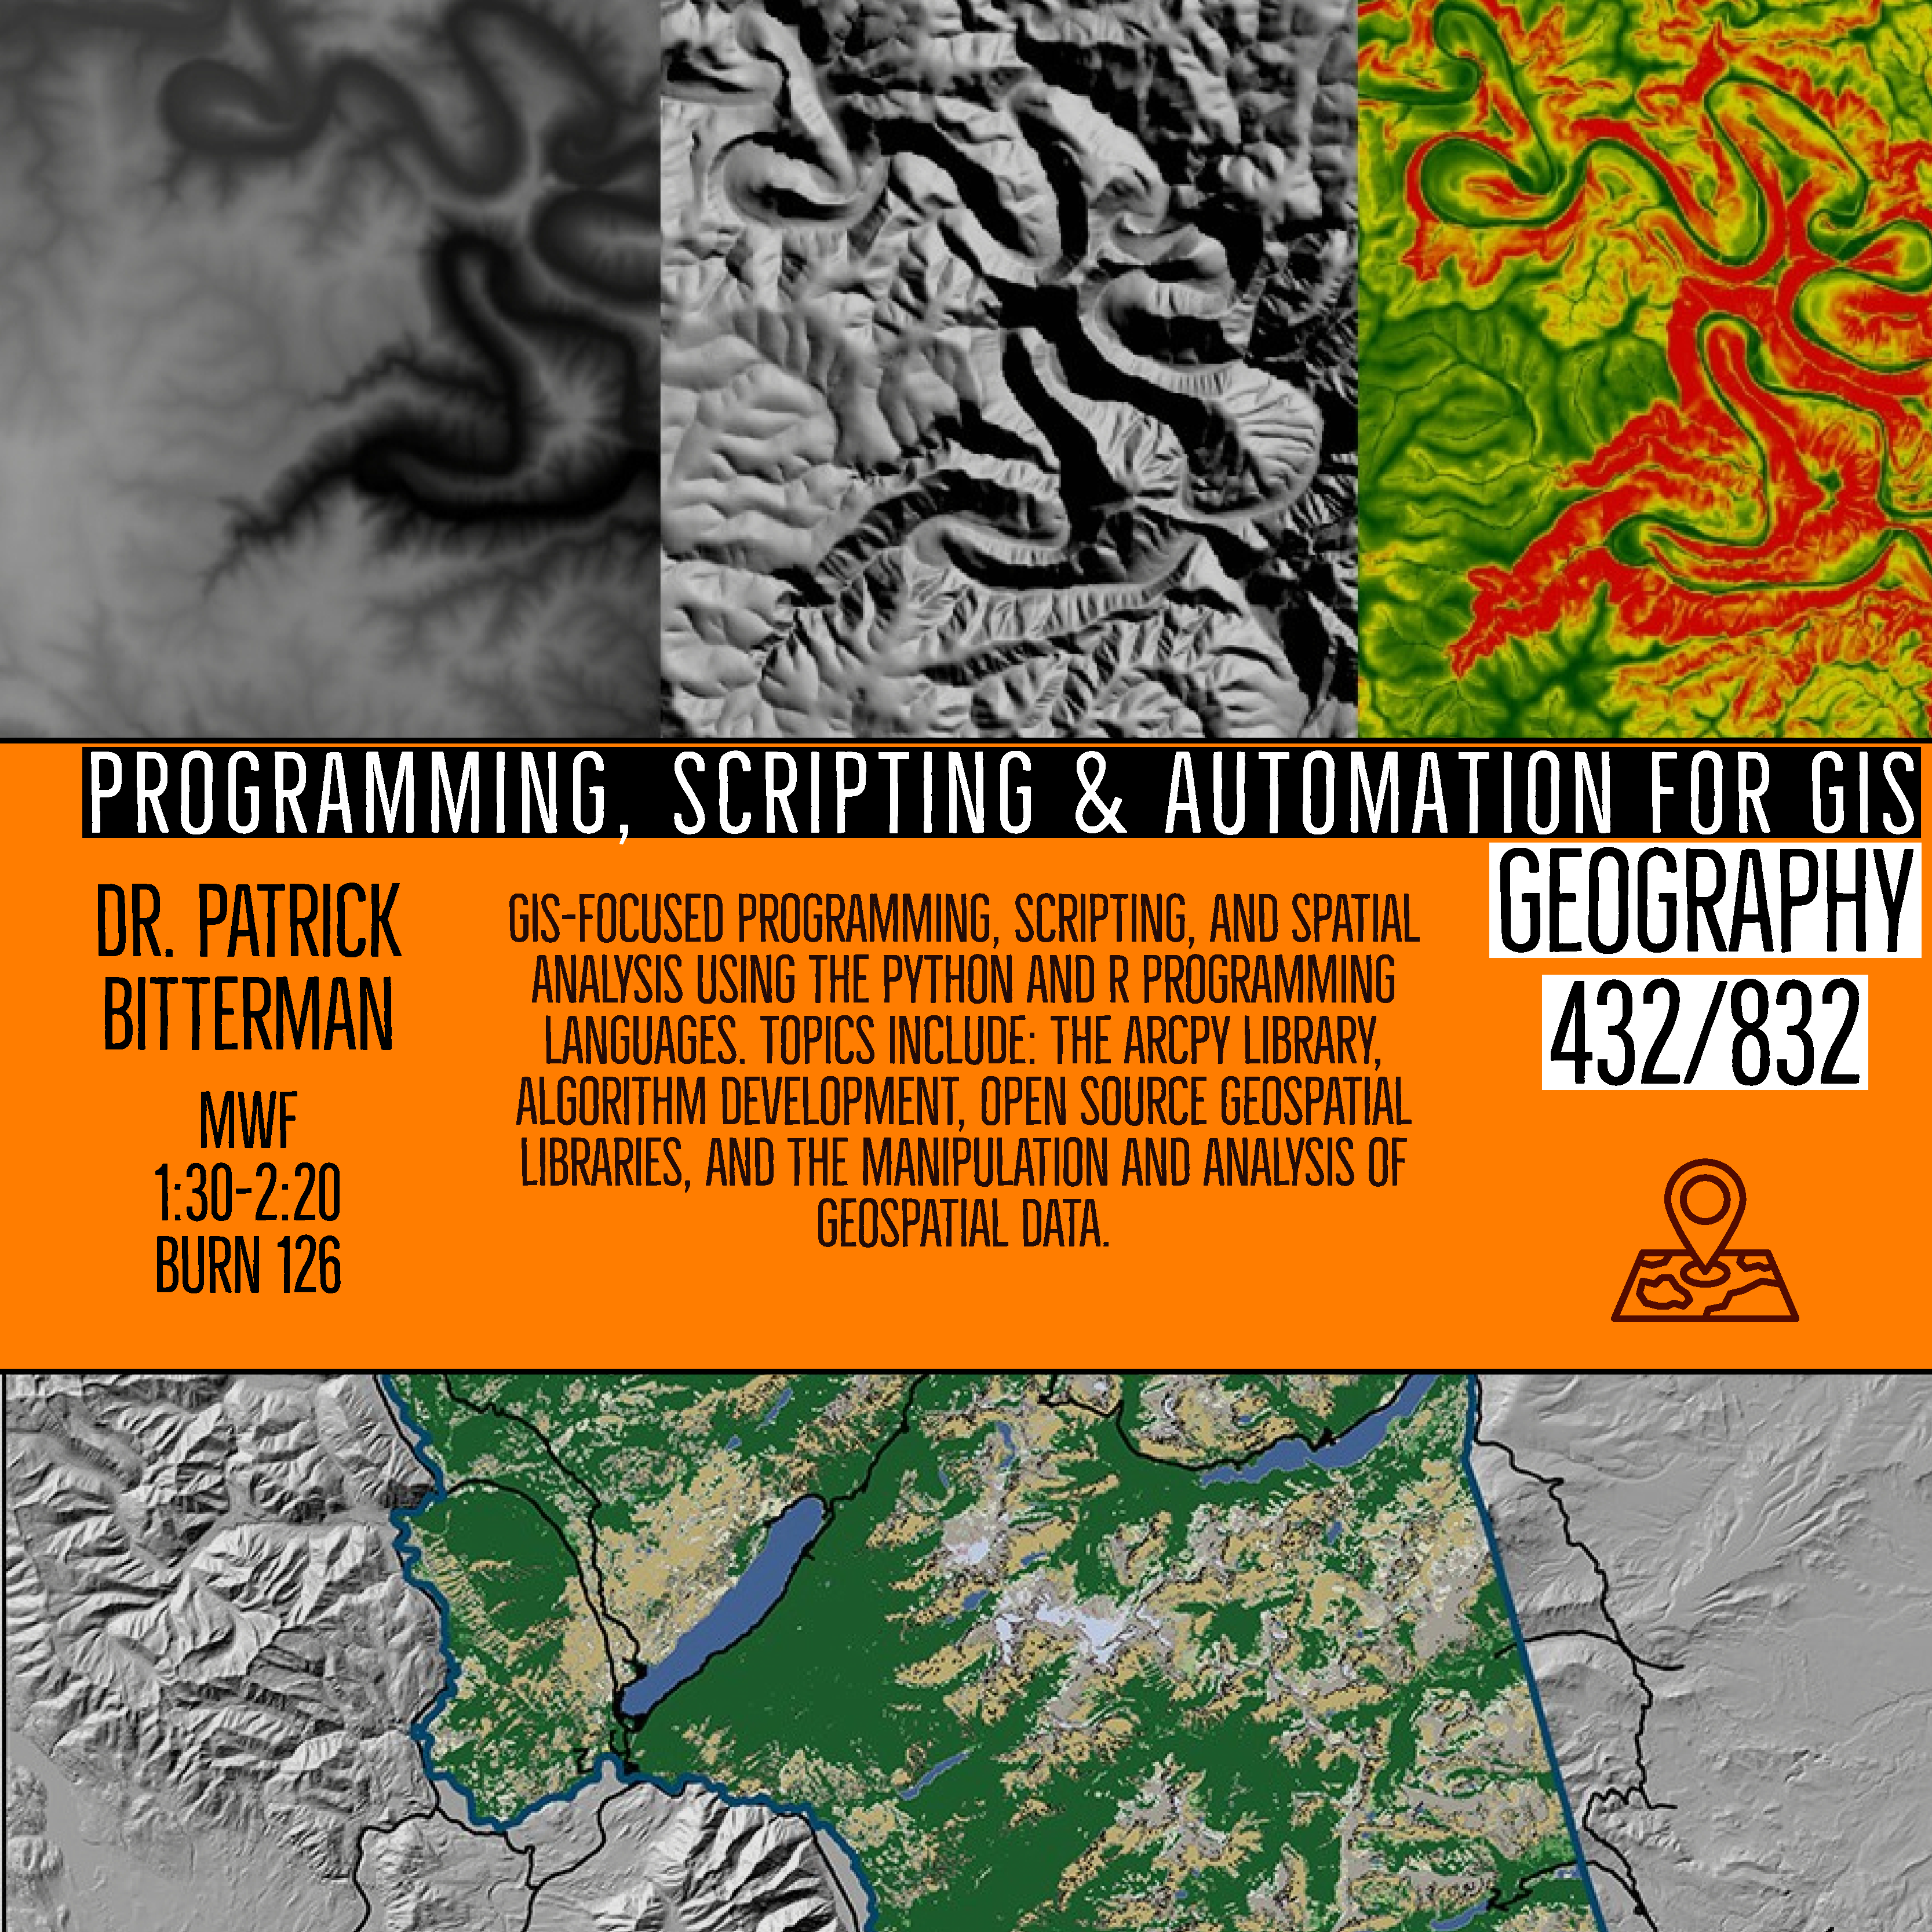 GEOG 432/832: Programming, Scripting & Automation for GIS